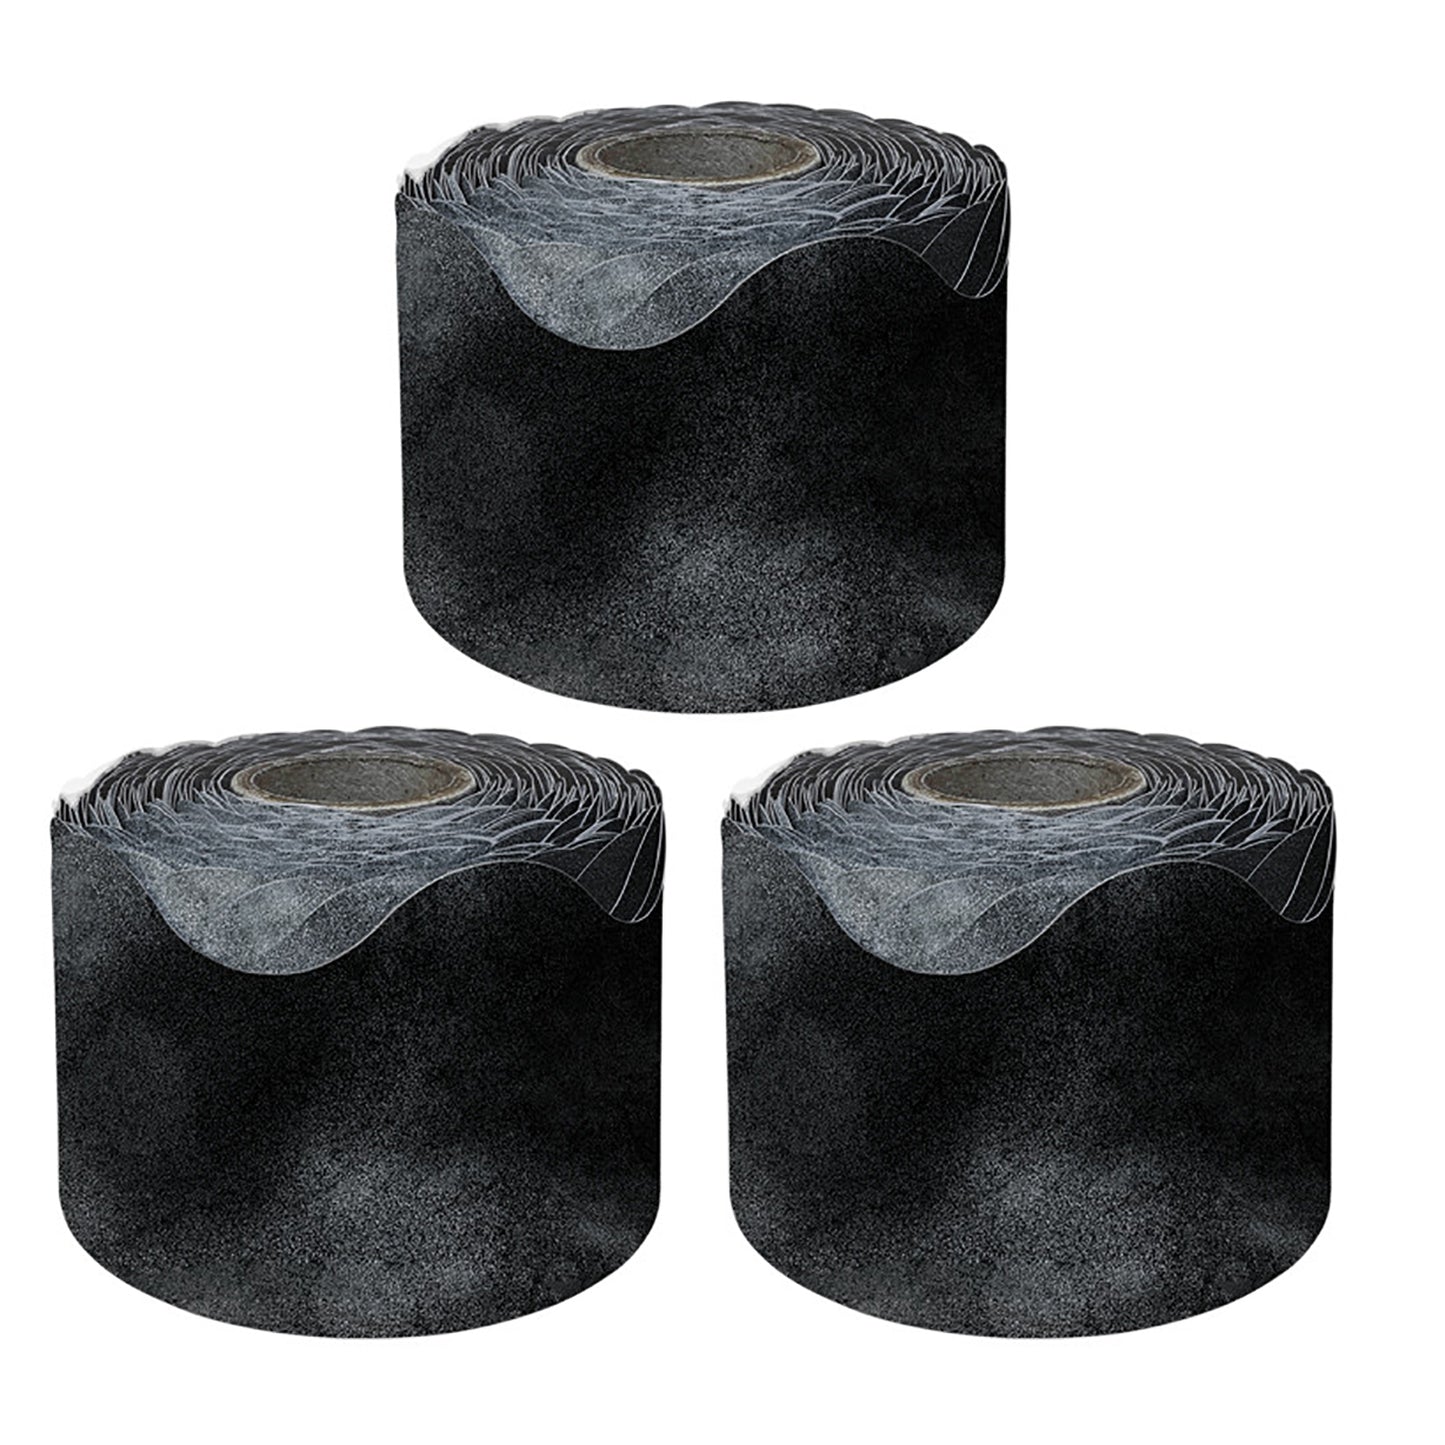 Chalkboard Rolled Scalloped Borders, 65 Feet Per Roll, Pack of 3